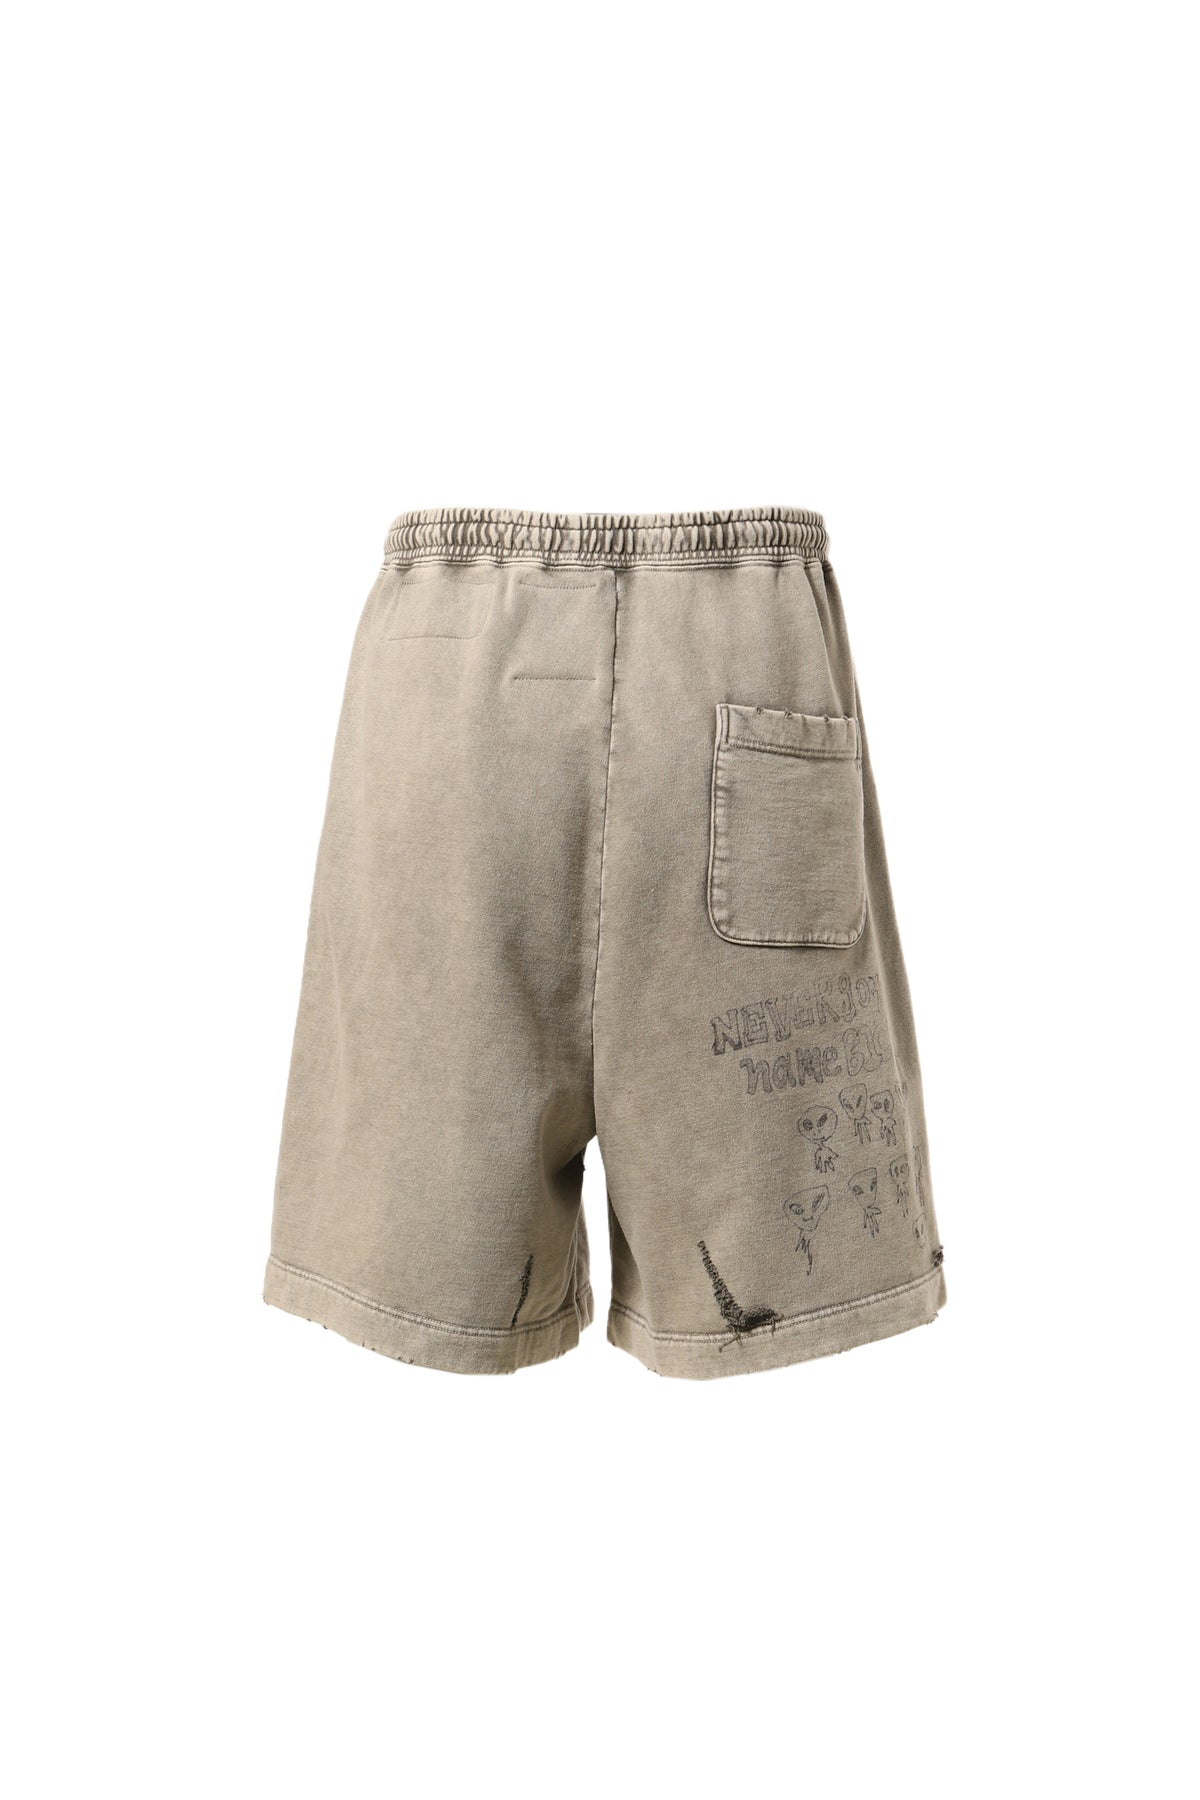 BLEACHED SHORTS/BEI